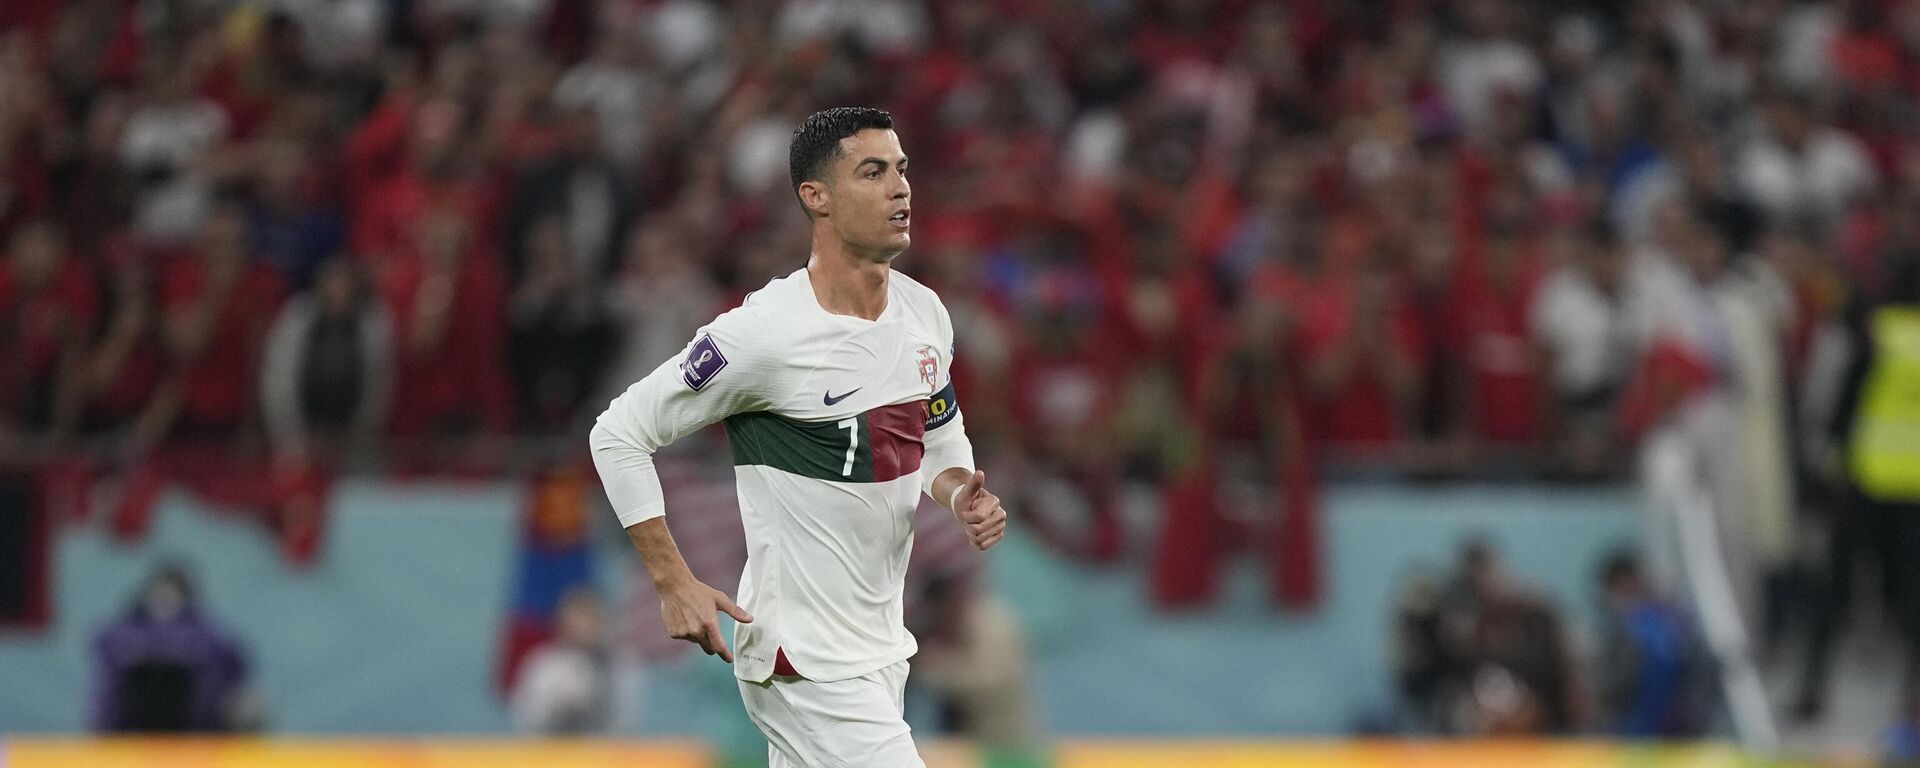 Portugal's Cristiano Ronaldo enters the pitch during the World Cup quarterfinal soccer match between Morocco and Portugal, at Al Thumama Stadium in Doha, Qatar, Saturday, Dec. 10, 2022. - Sputnik India, 1920, 22.12.2022